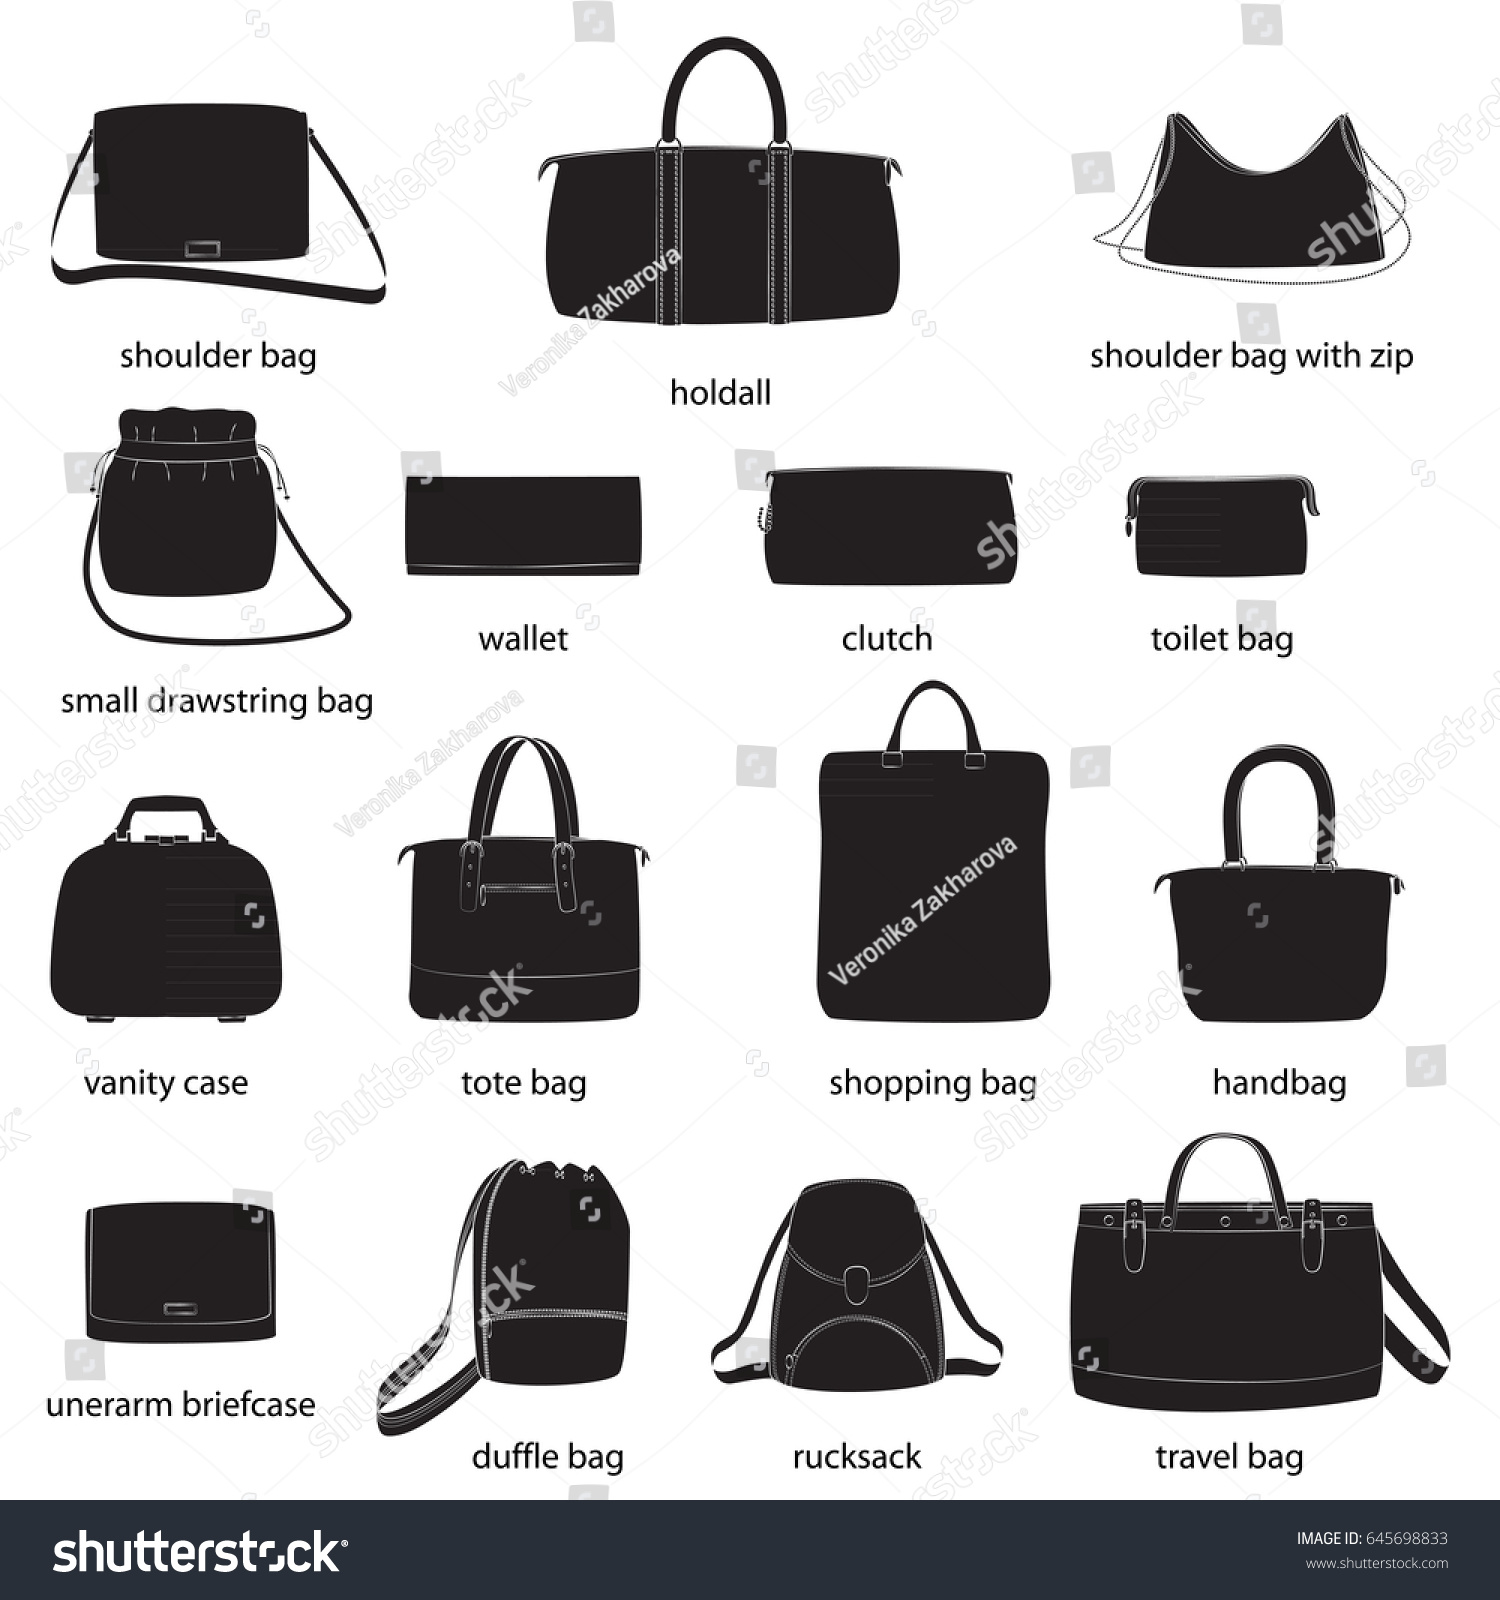 Names Of Different Bag Styles